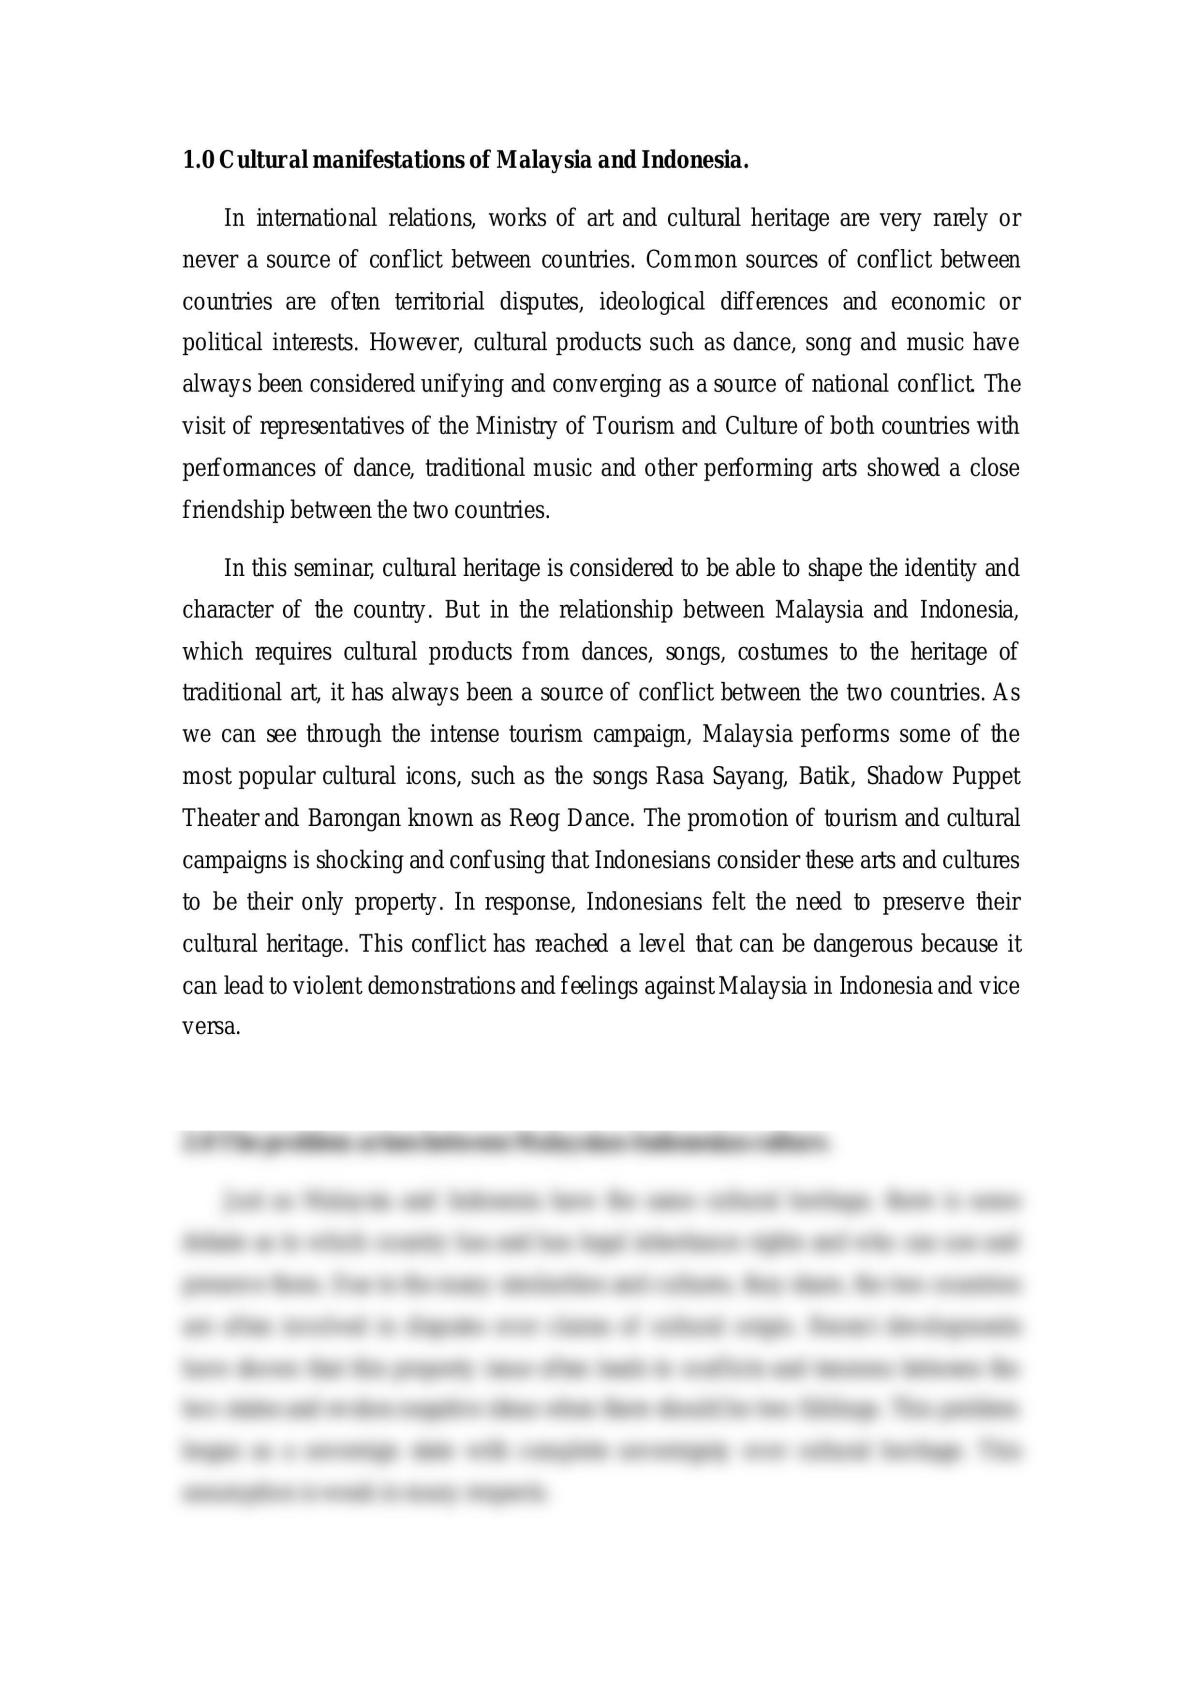 Cultural manifestations of Malaysia and Indonesia - Page 1